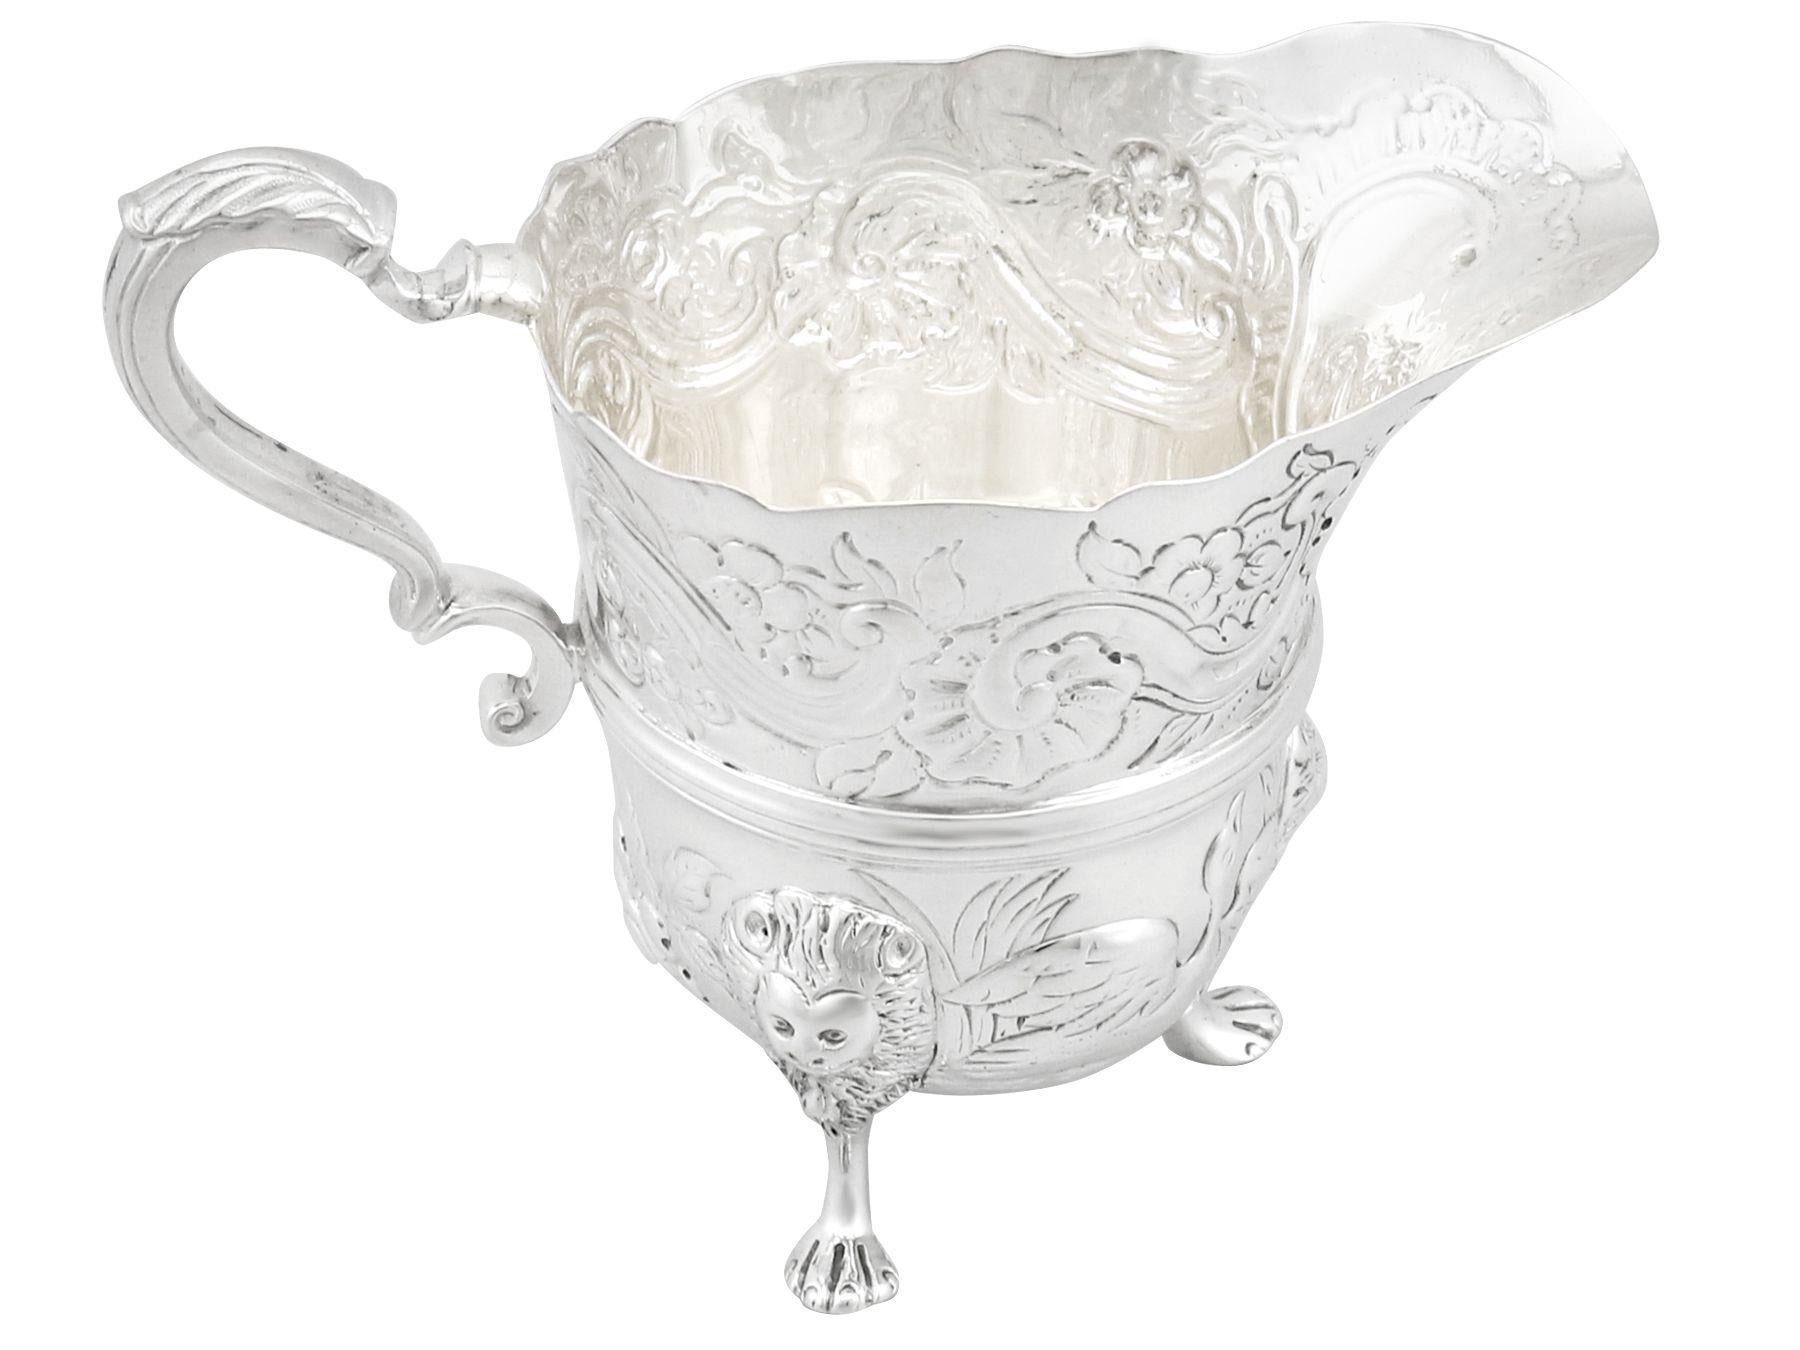 This fine antique Victorian sterling silver cream jug has a plain circular inverted bell shaped form, in the classic Georgian Irish style.

The body of this Victorian cream jug is embellished with chased floral and scrolling foliate designs above